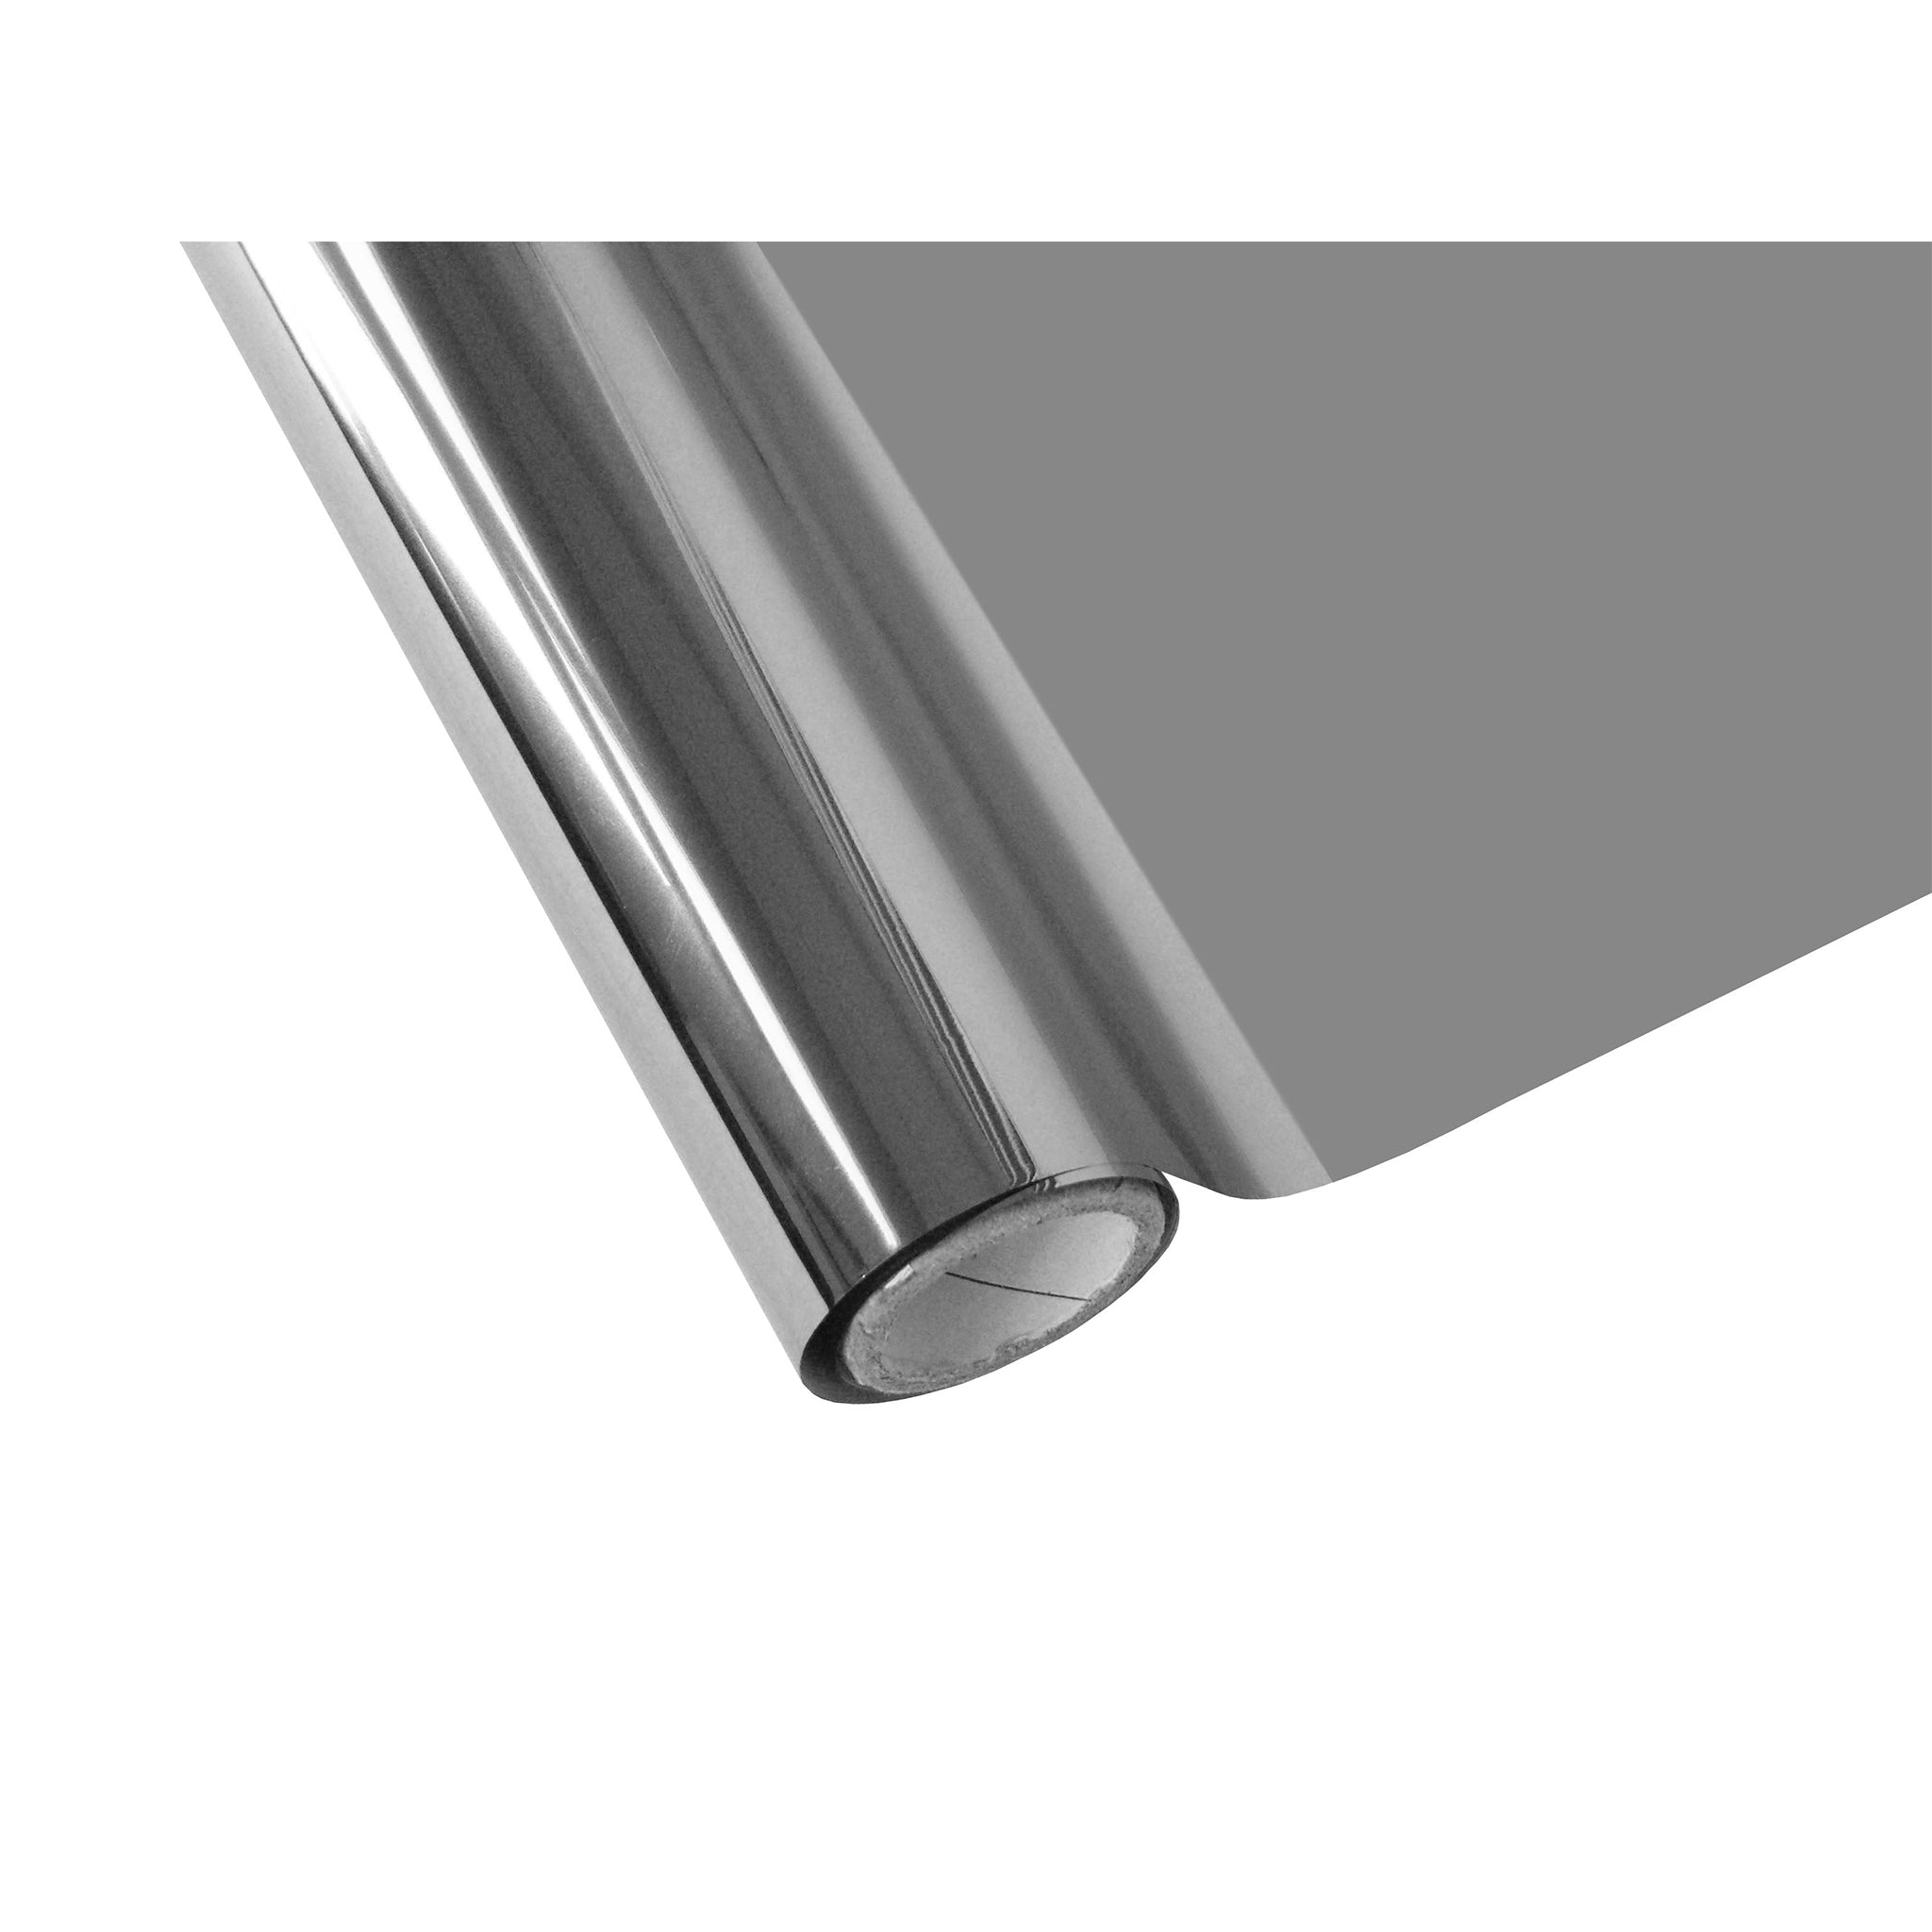 25 Foot Roll of 12" StarCraft Electra Foil - Chrome